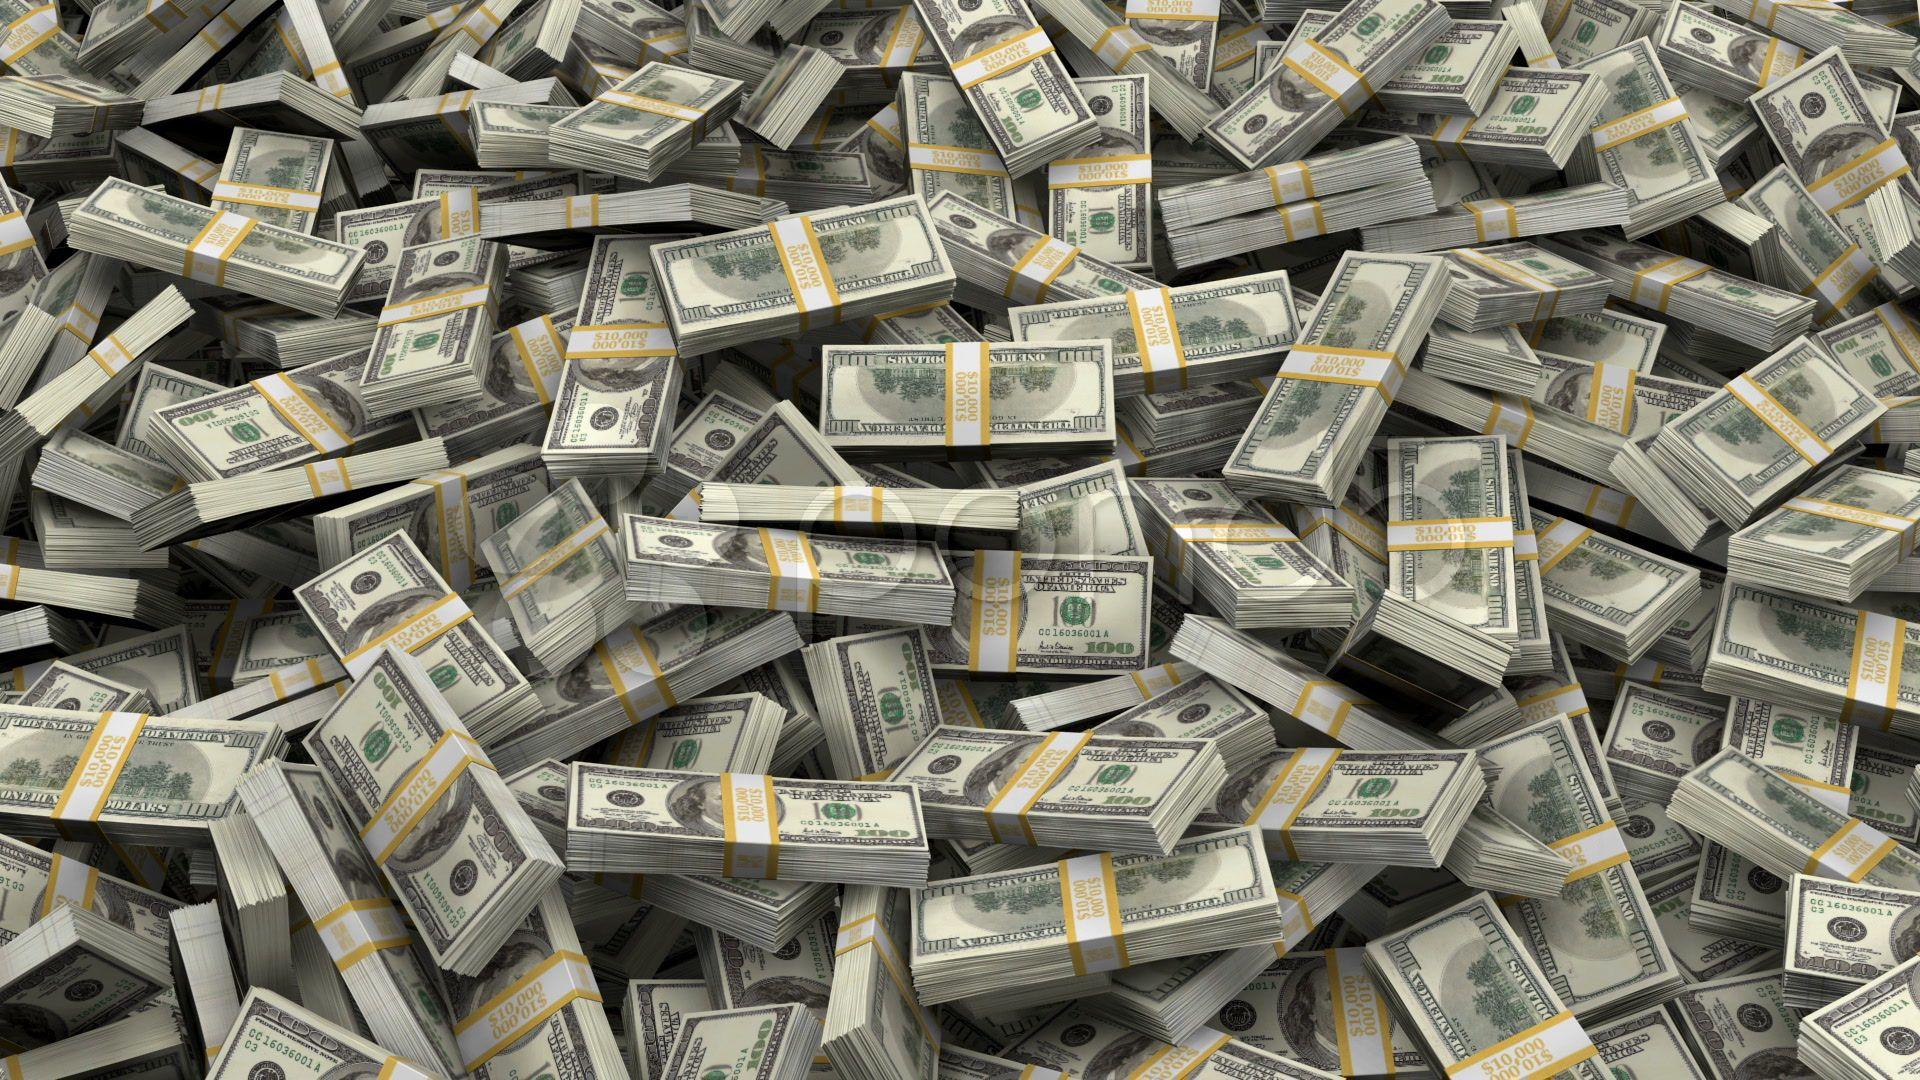 Dollar HD Wallpaper Background For Free Download, BsnSCB Graphics